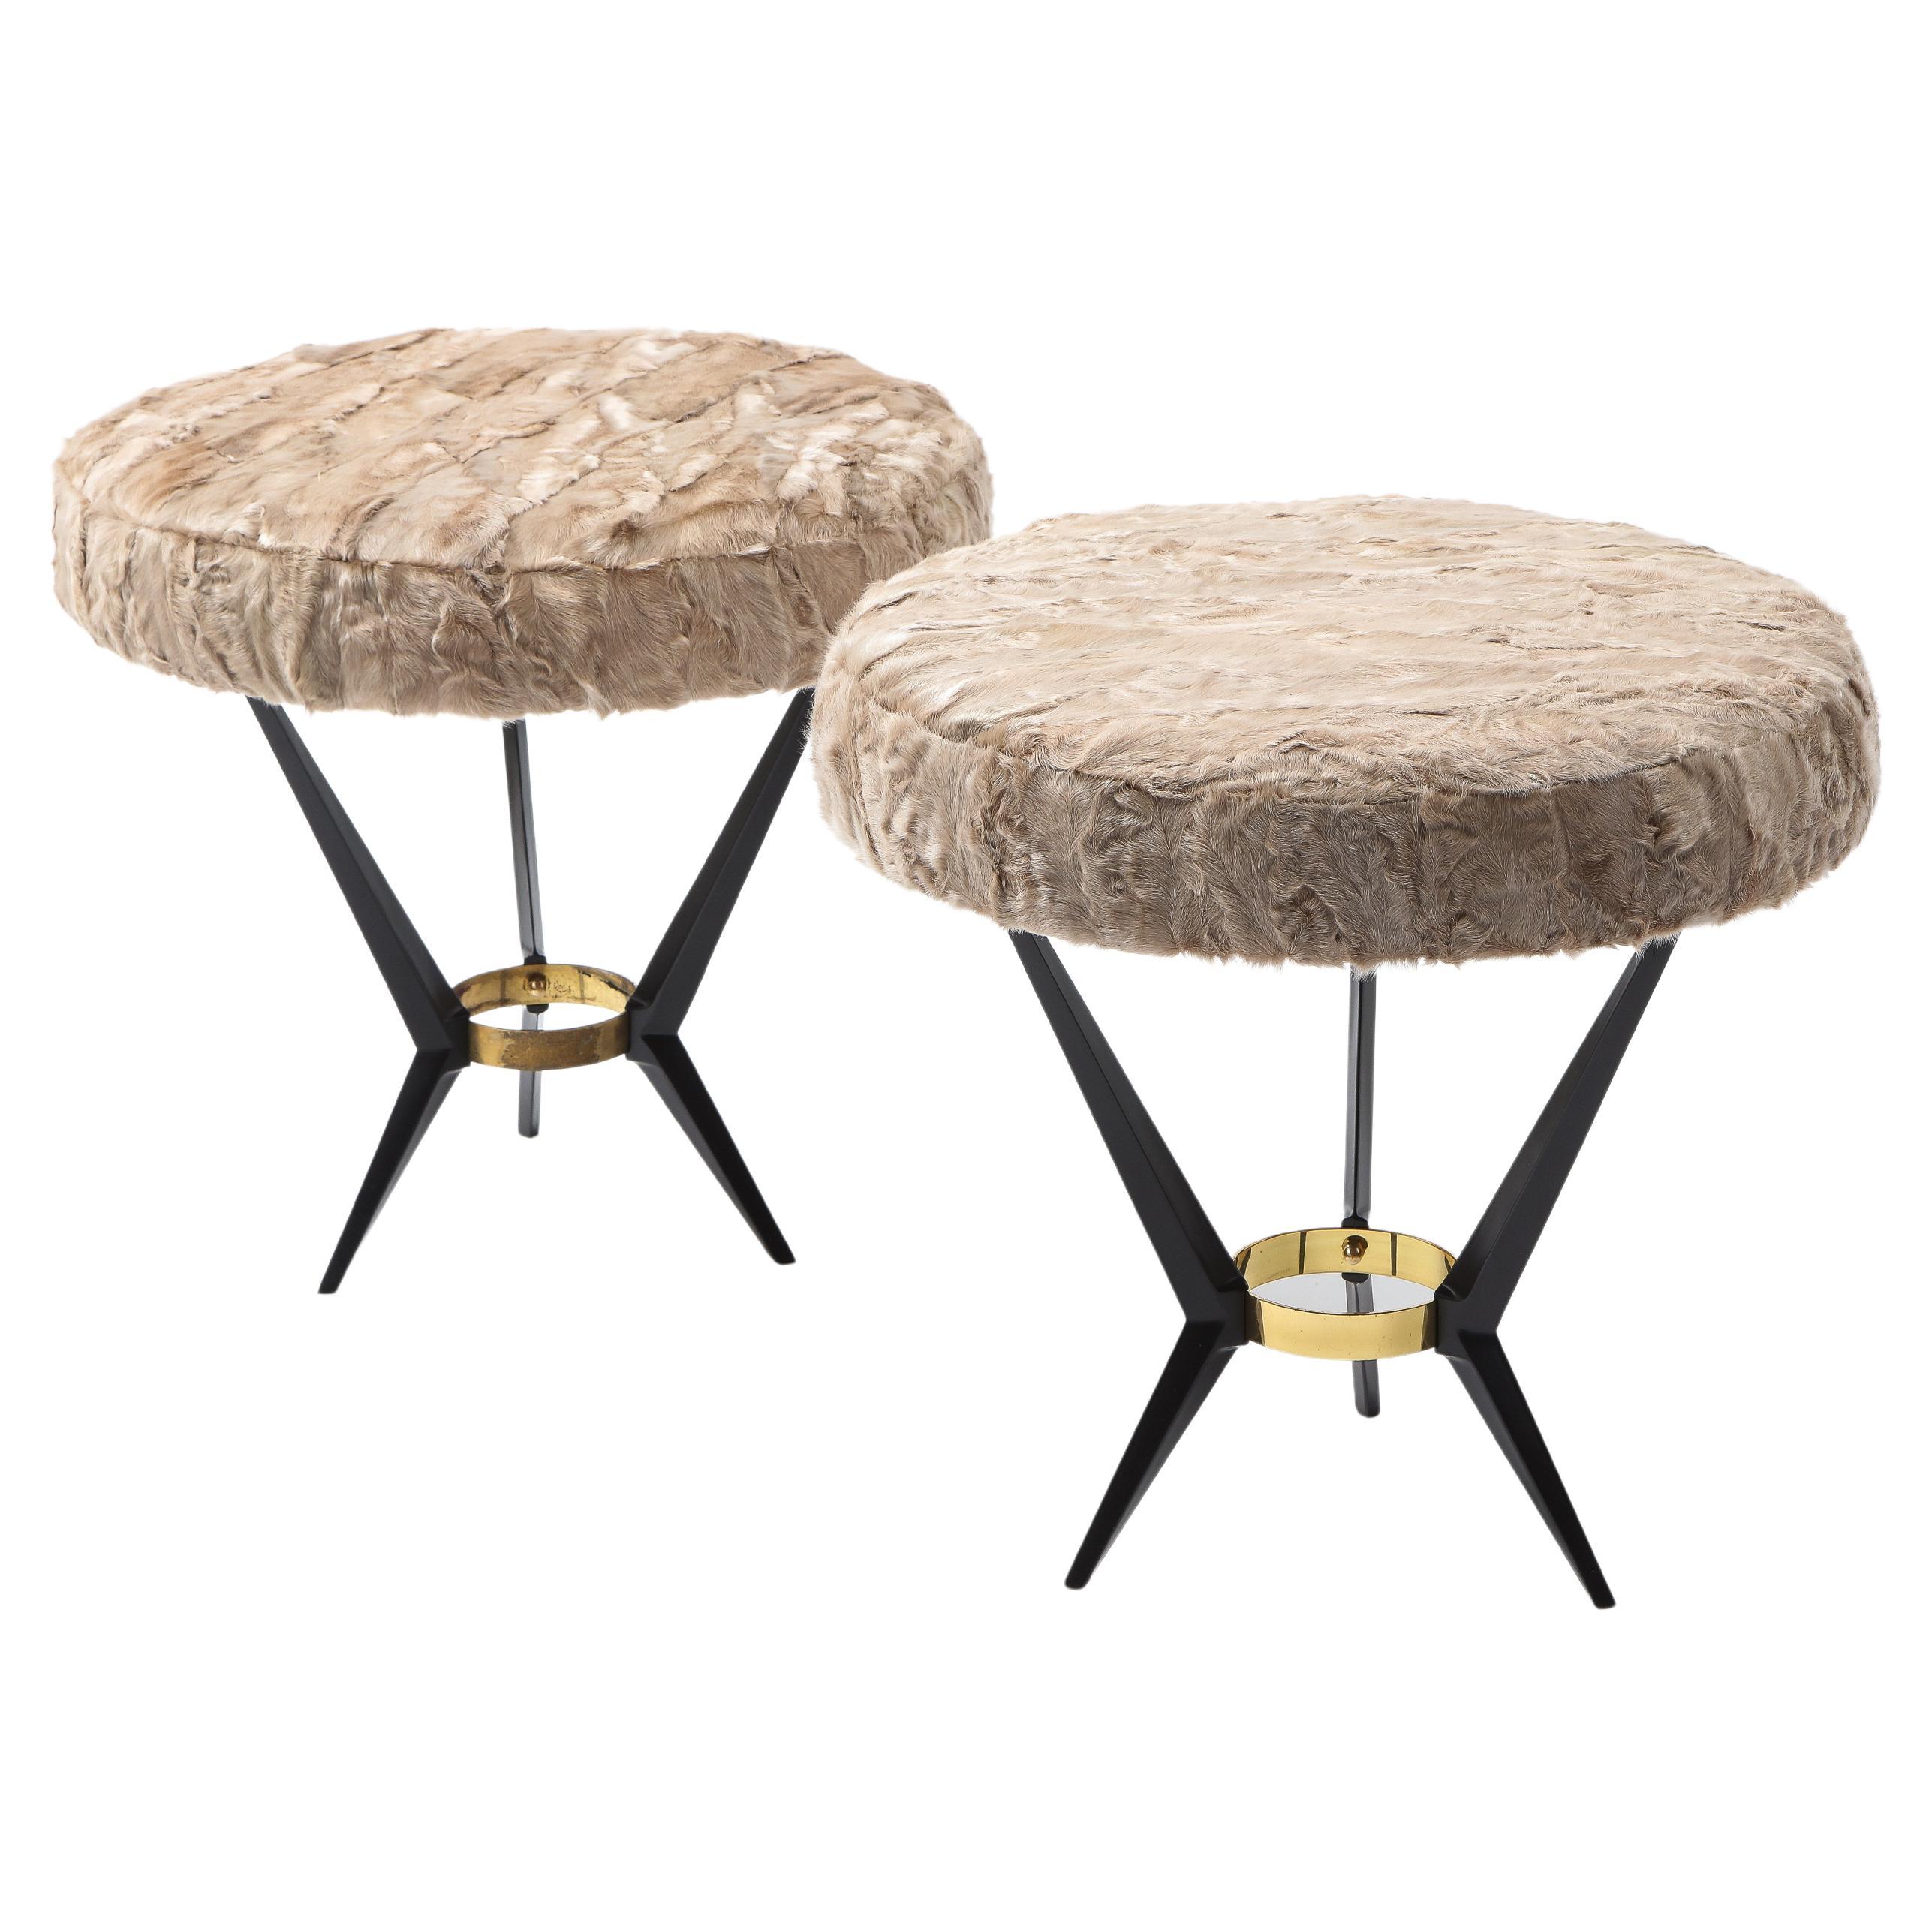 Elegant pair of stools in enameled cast aluminum and brass with upholstered tops.